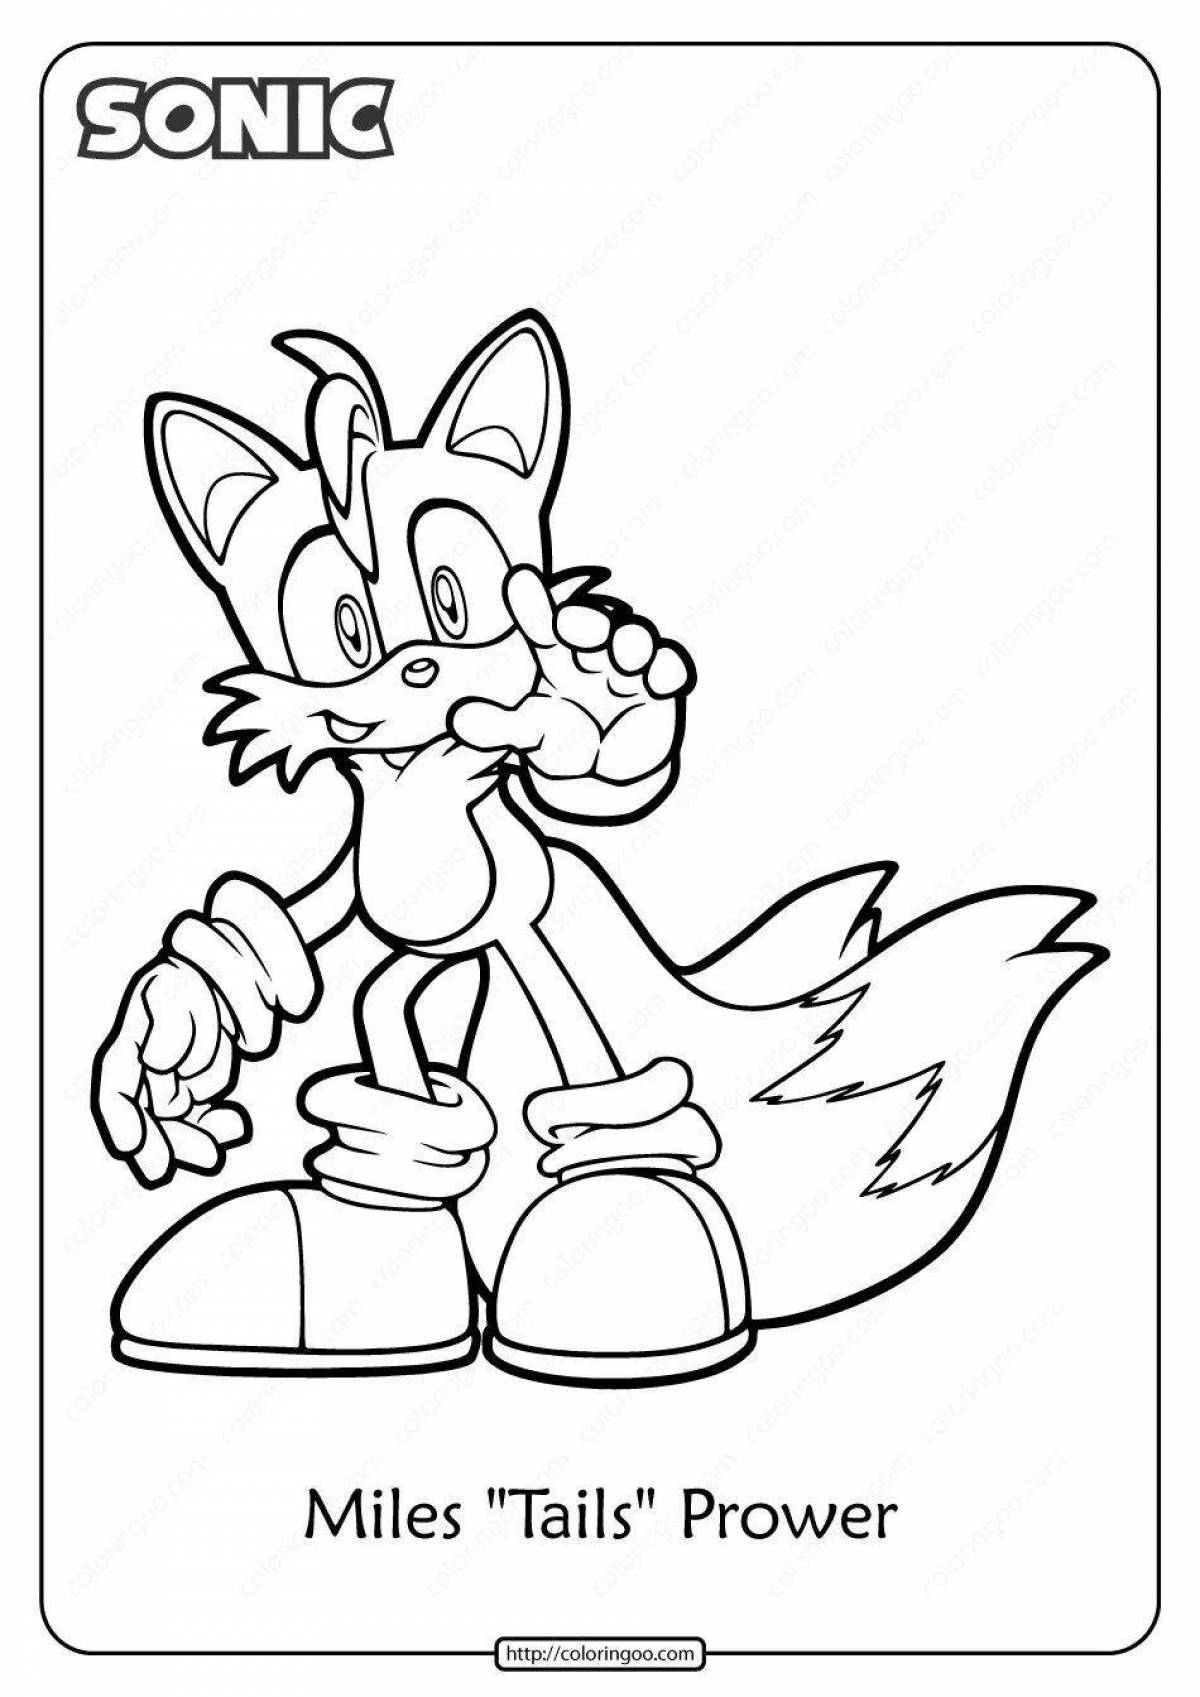 Miles tails prower's dazzling coloring book